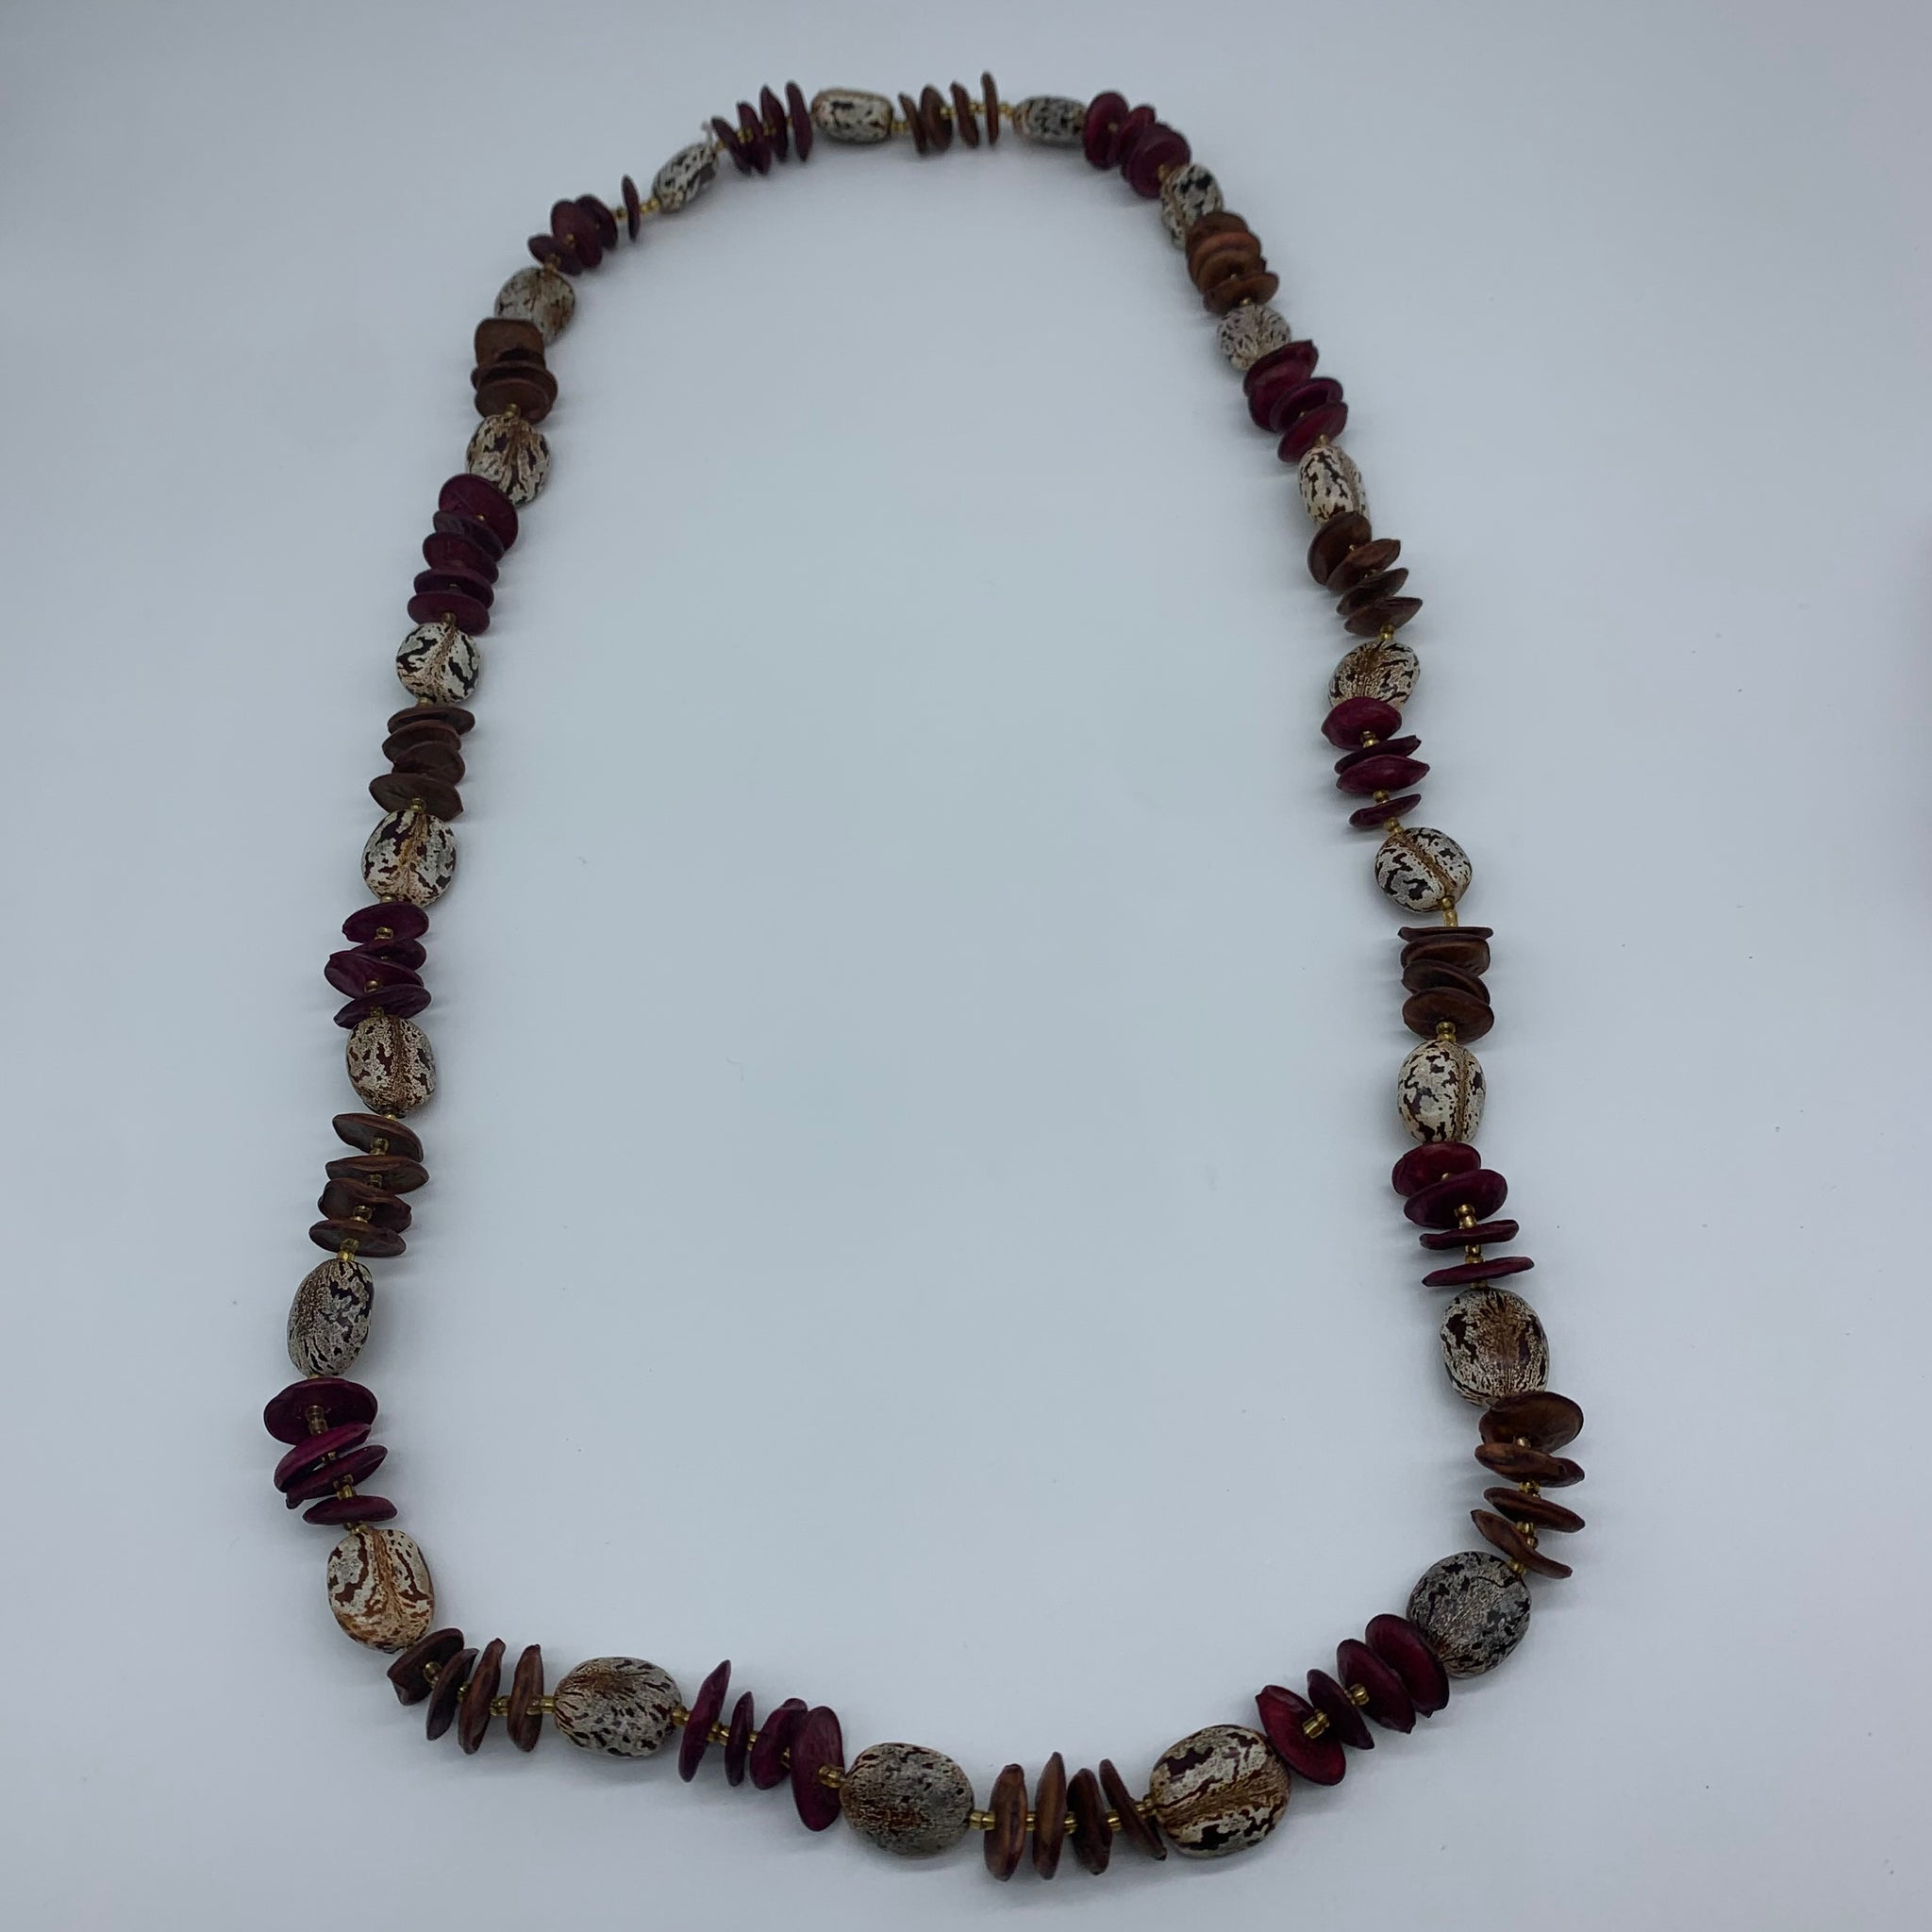 Seeds Necklace W/Beads-Brown Variation